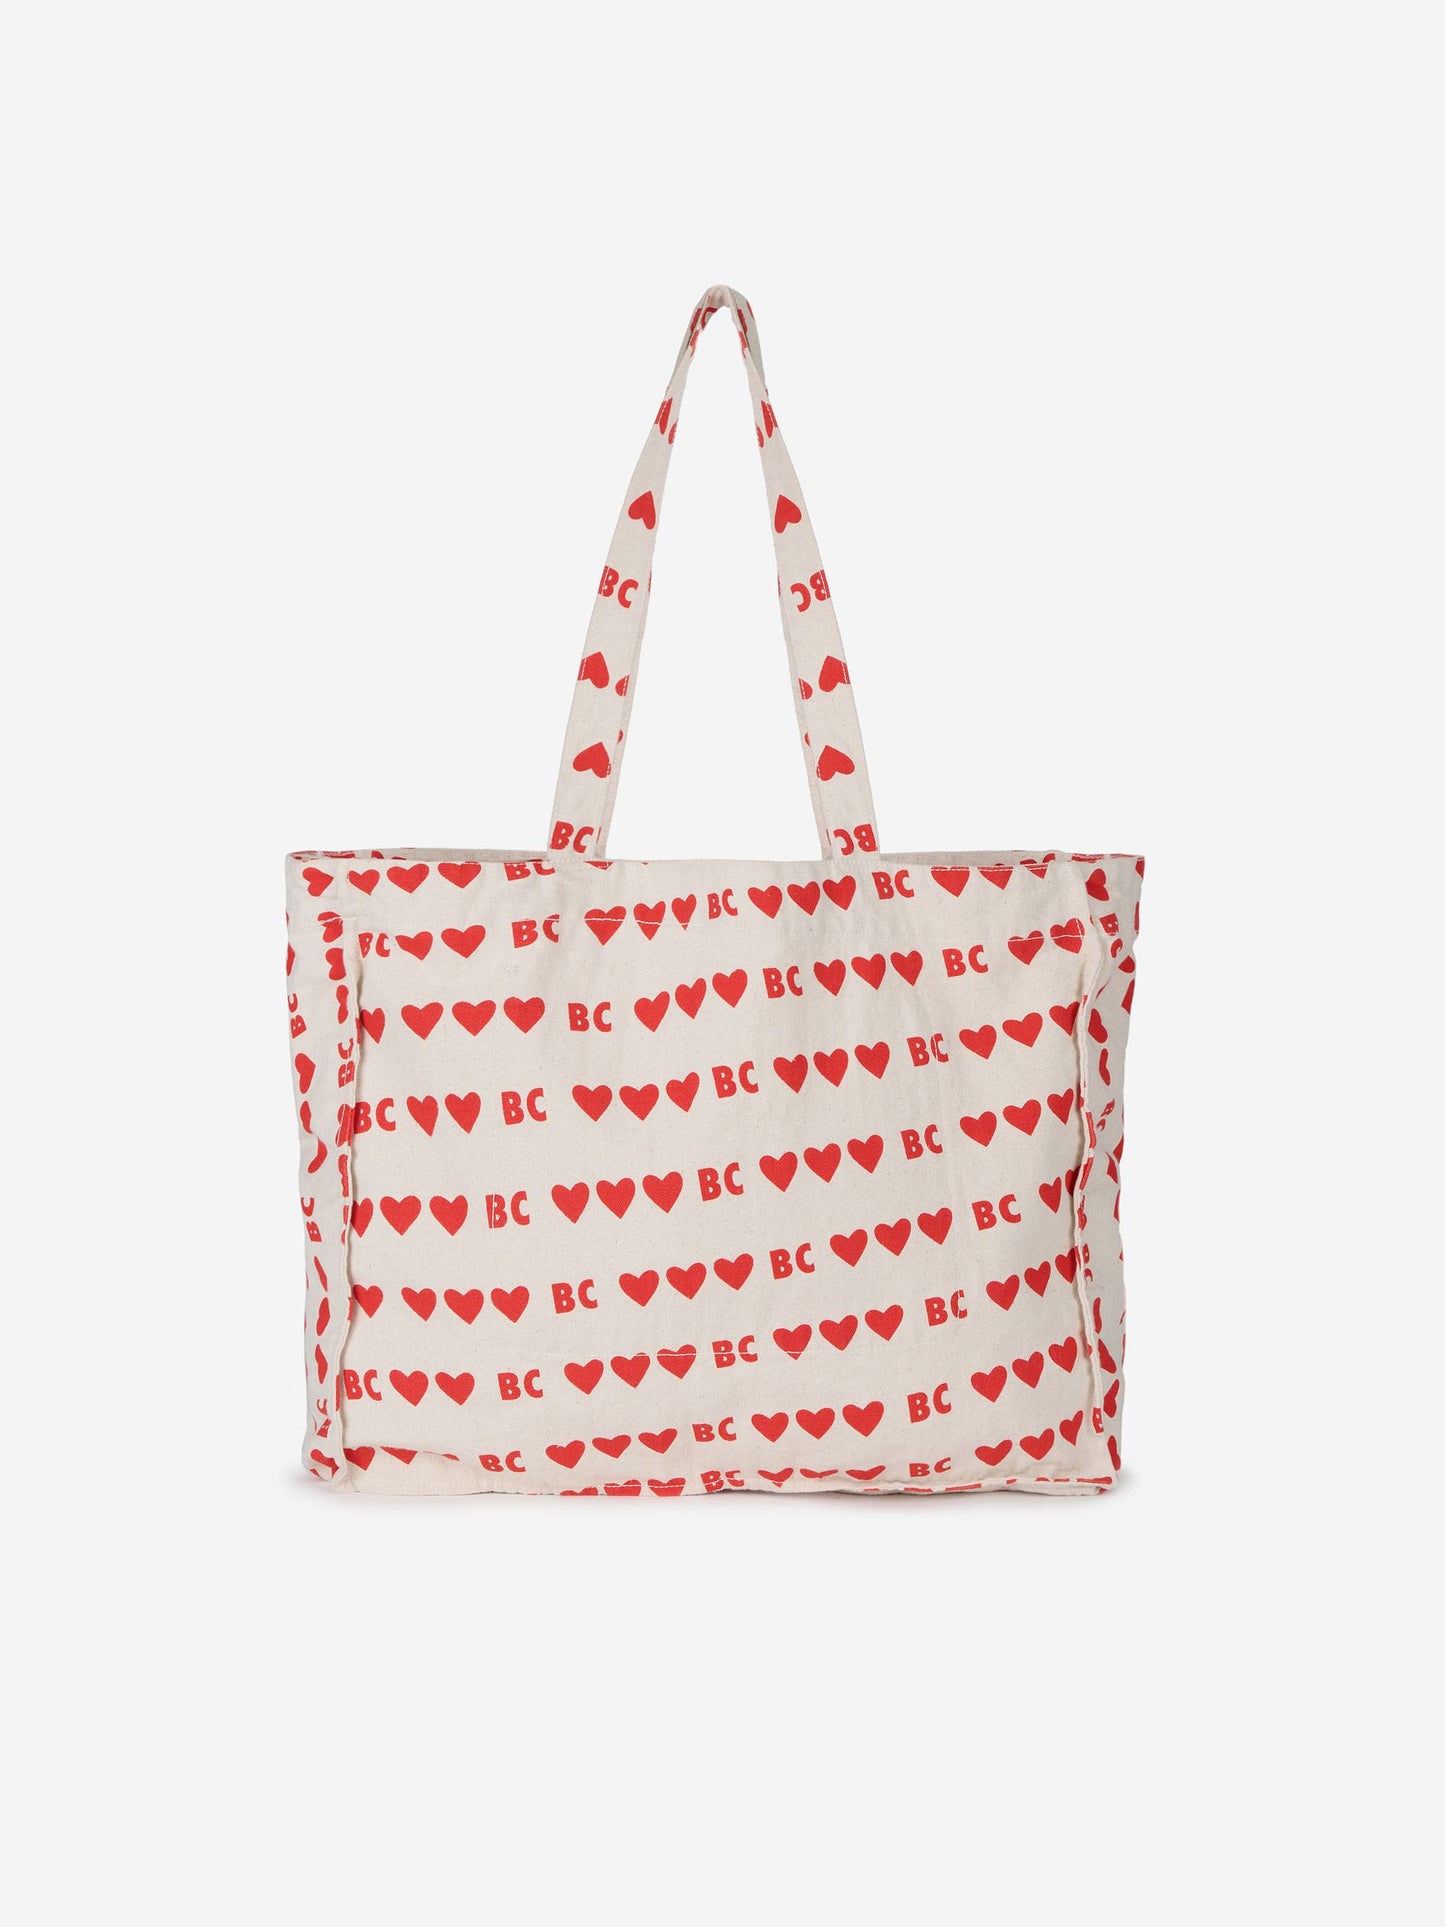 BC hearts all over tote bag